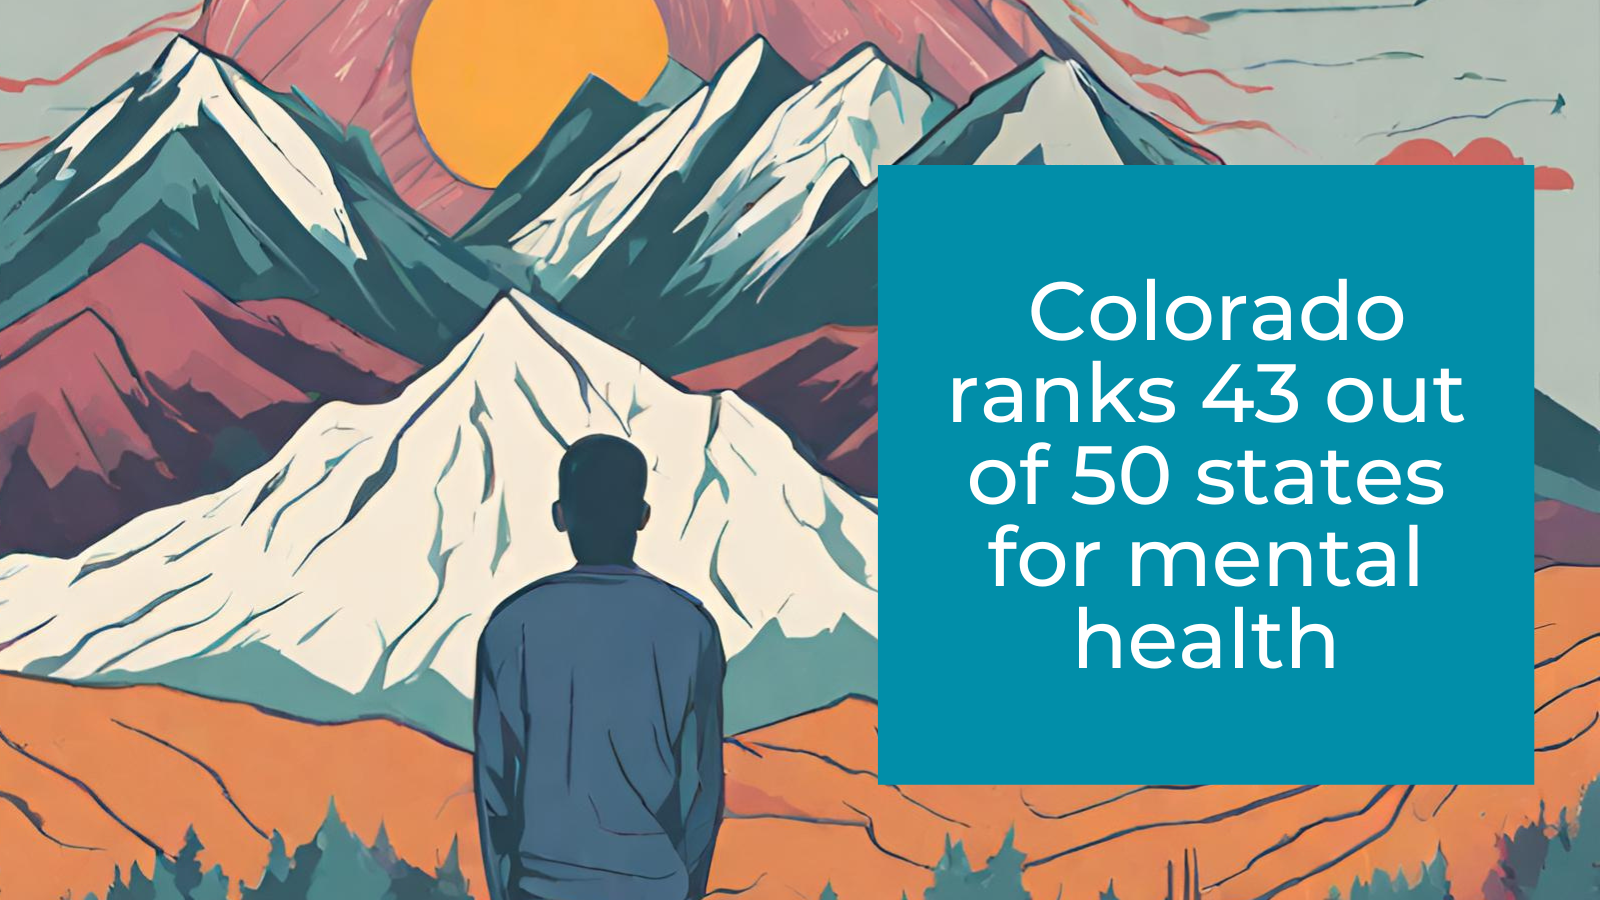 The image reveals that Colorado ranks 45 out of 50 states for mental health services